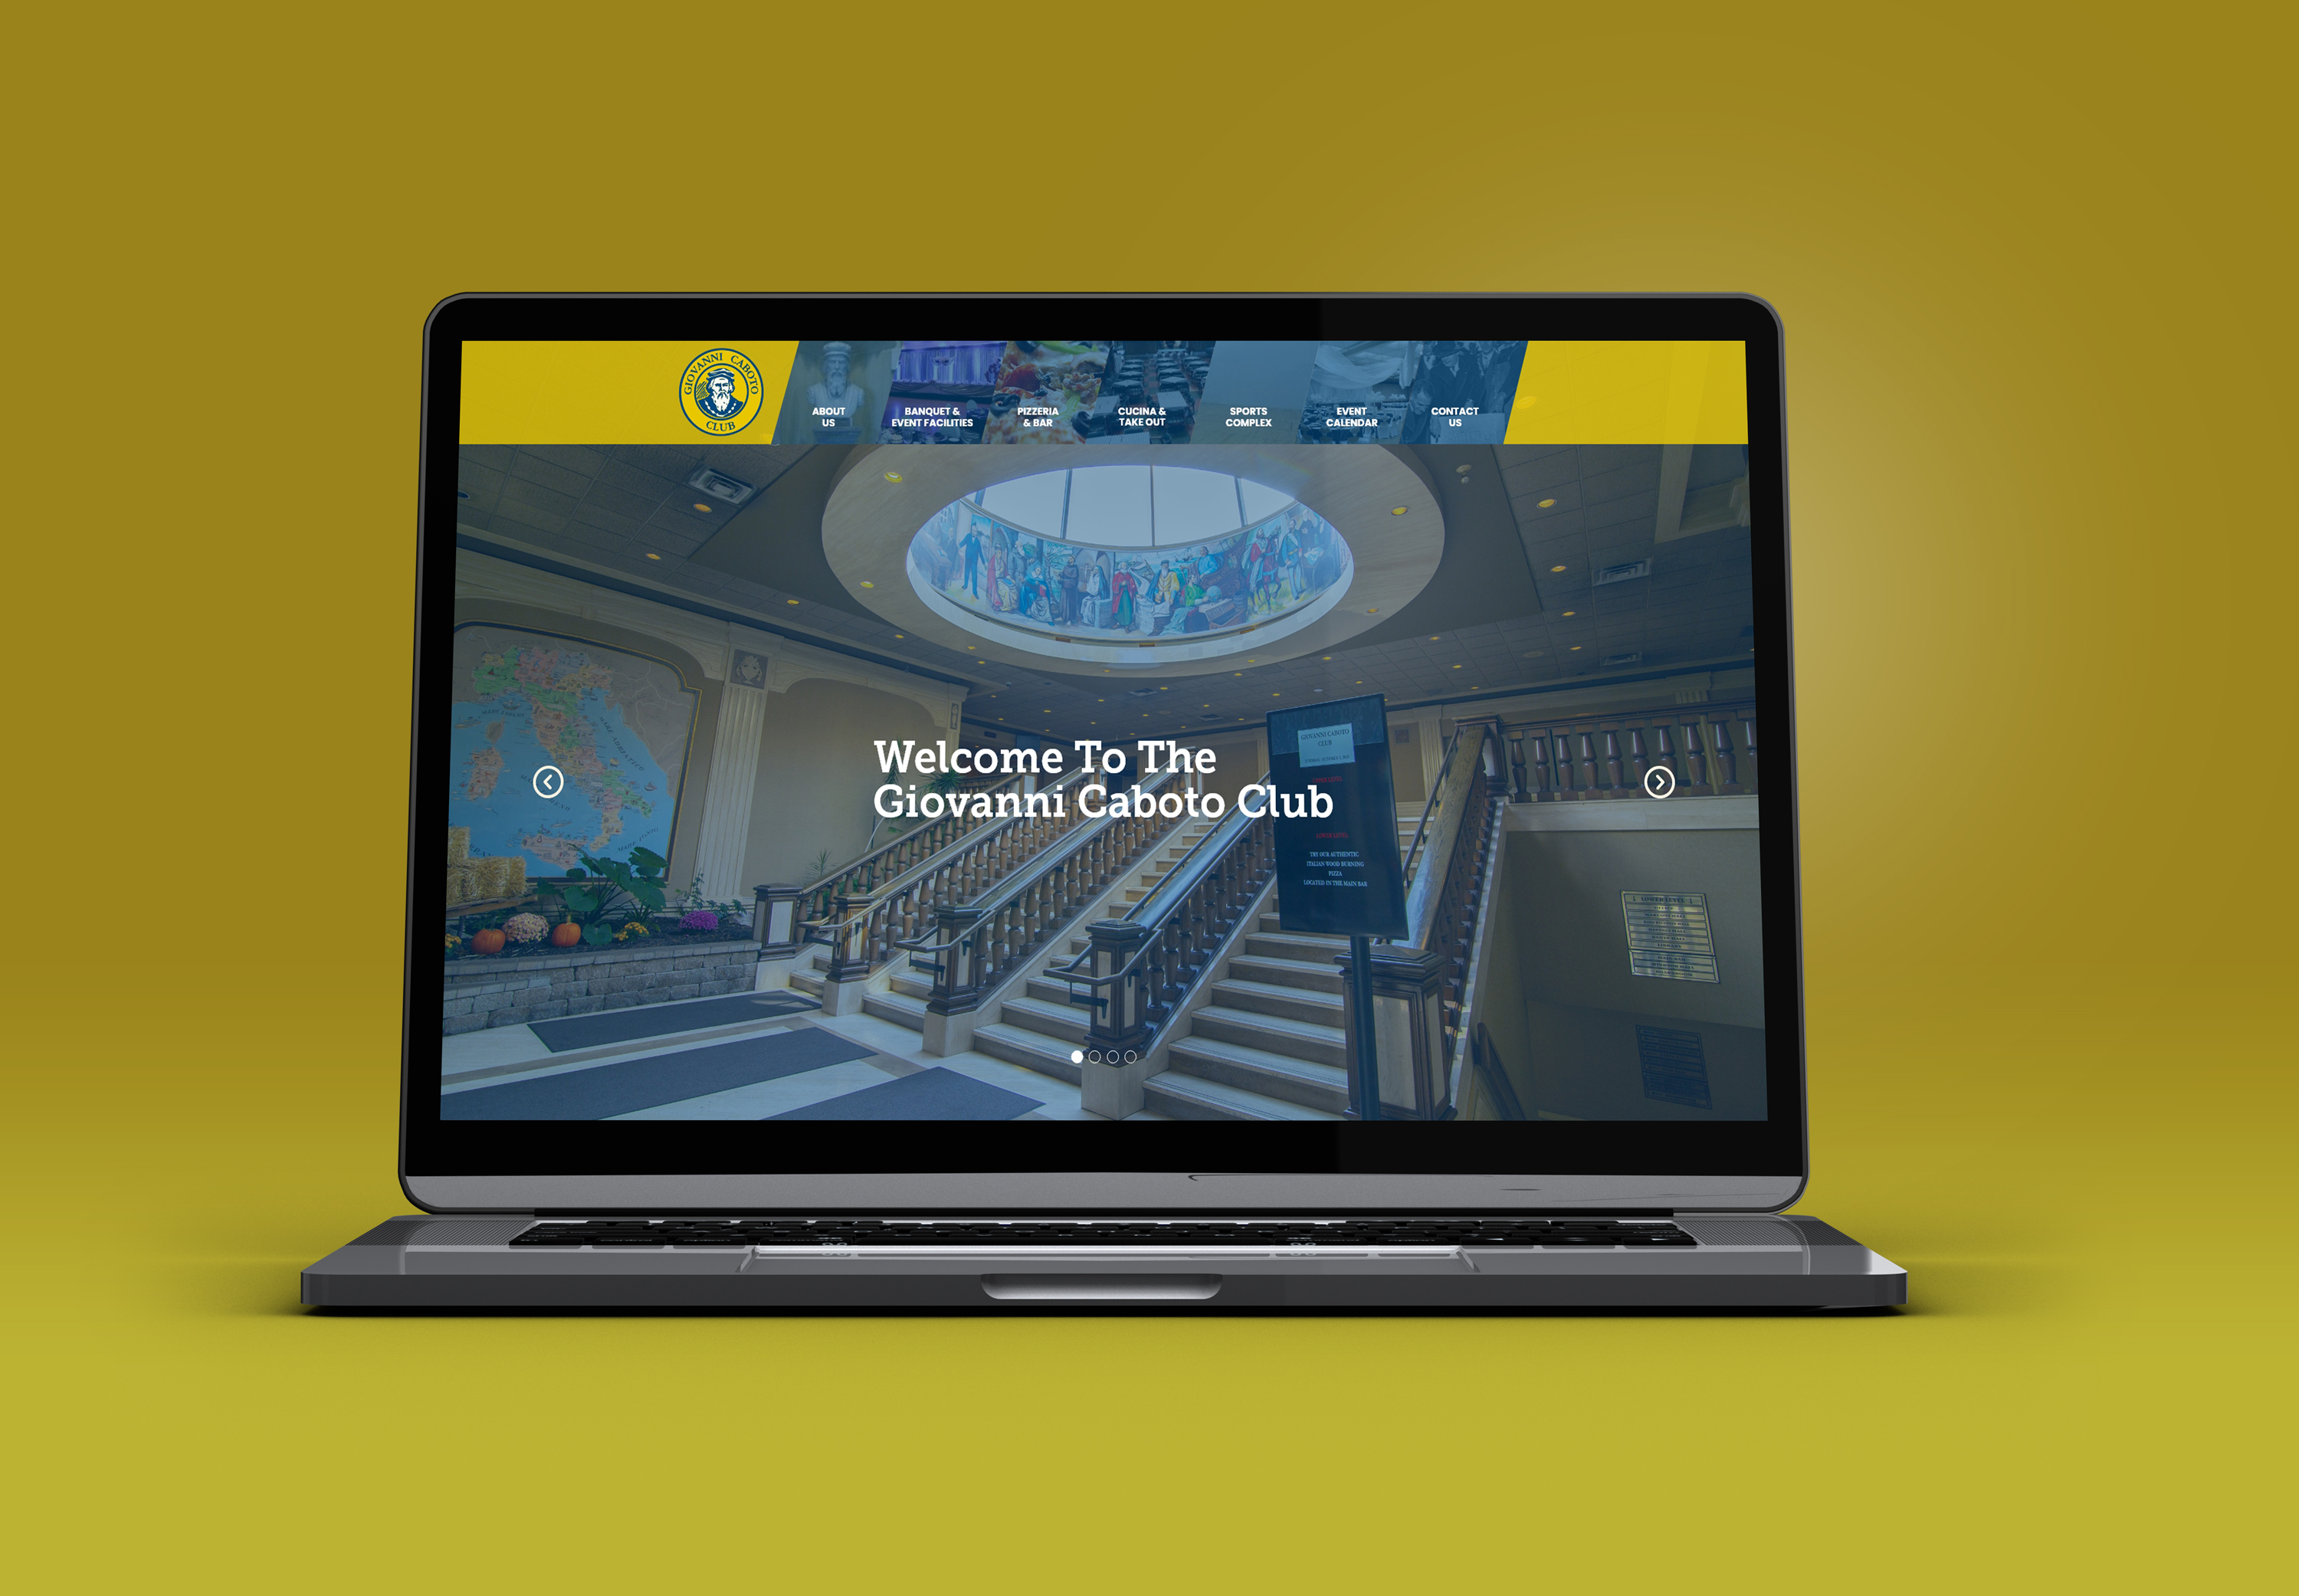 Caboto Club homepage displayed on a laptop screen